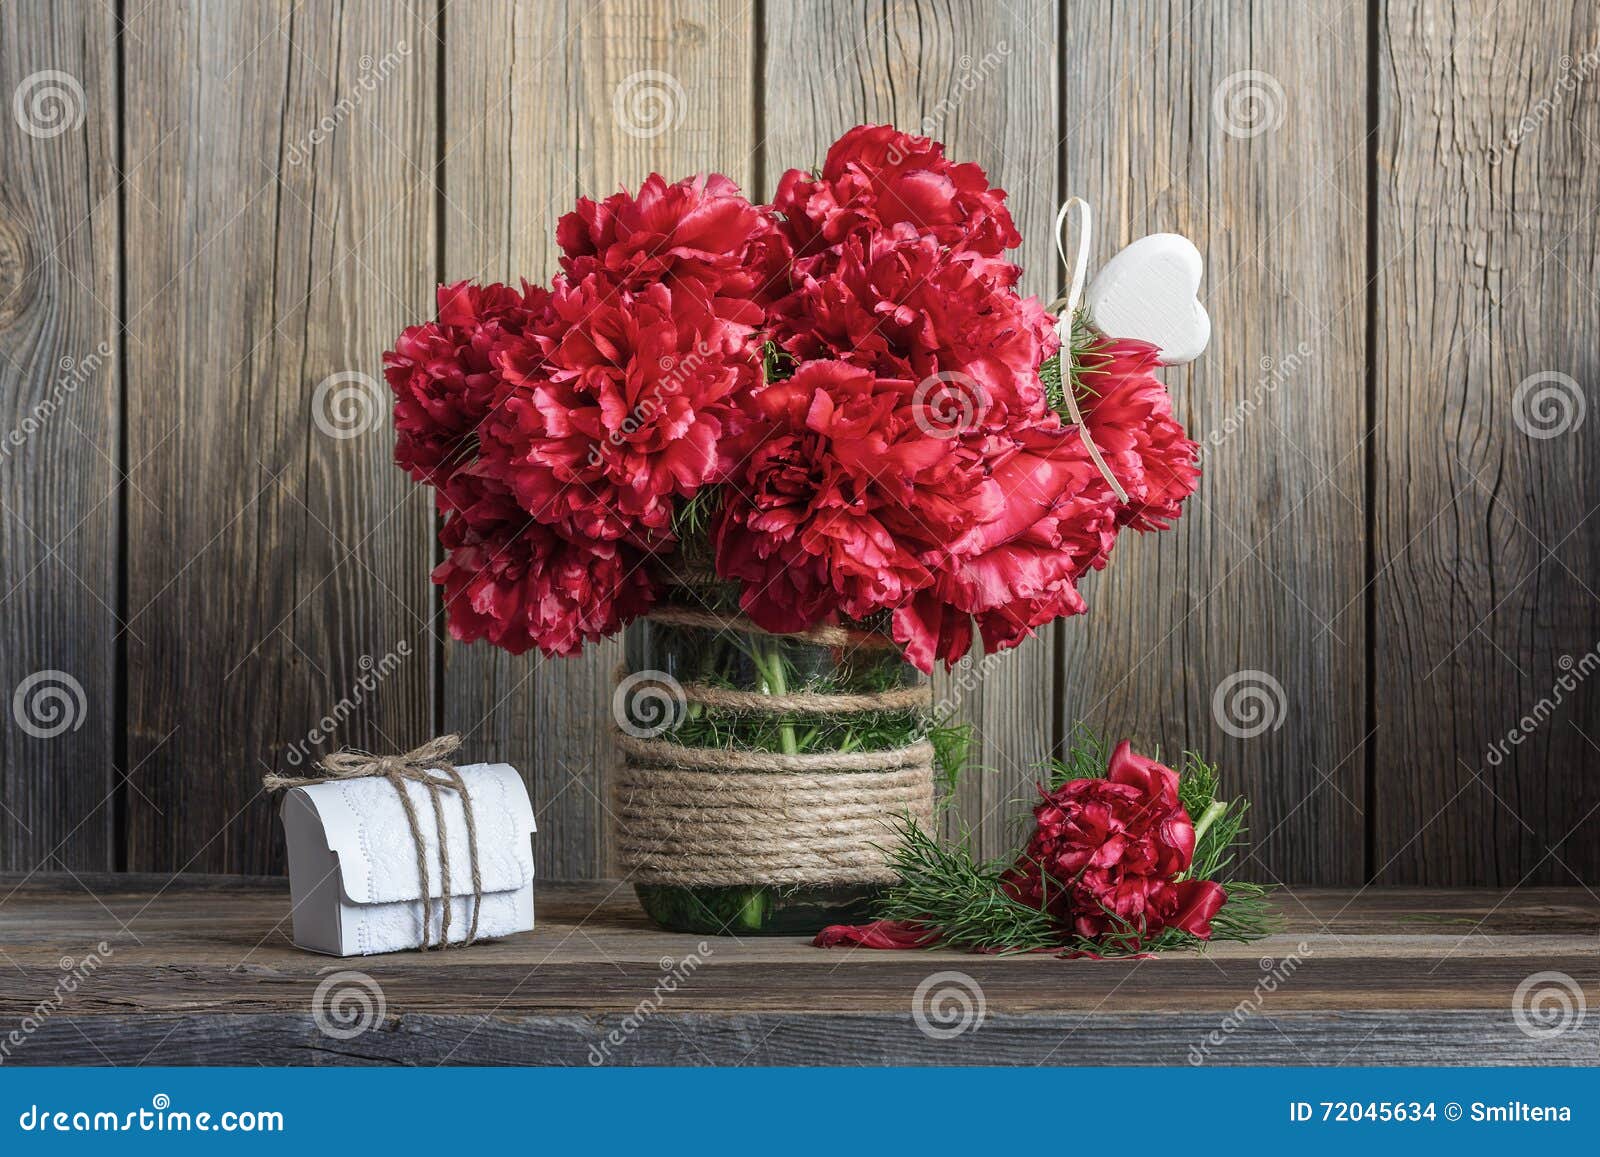 dark red peonies in a decorated glass jar